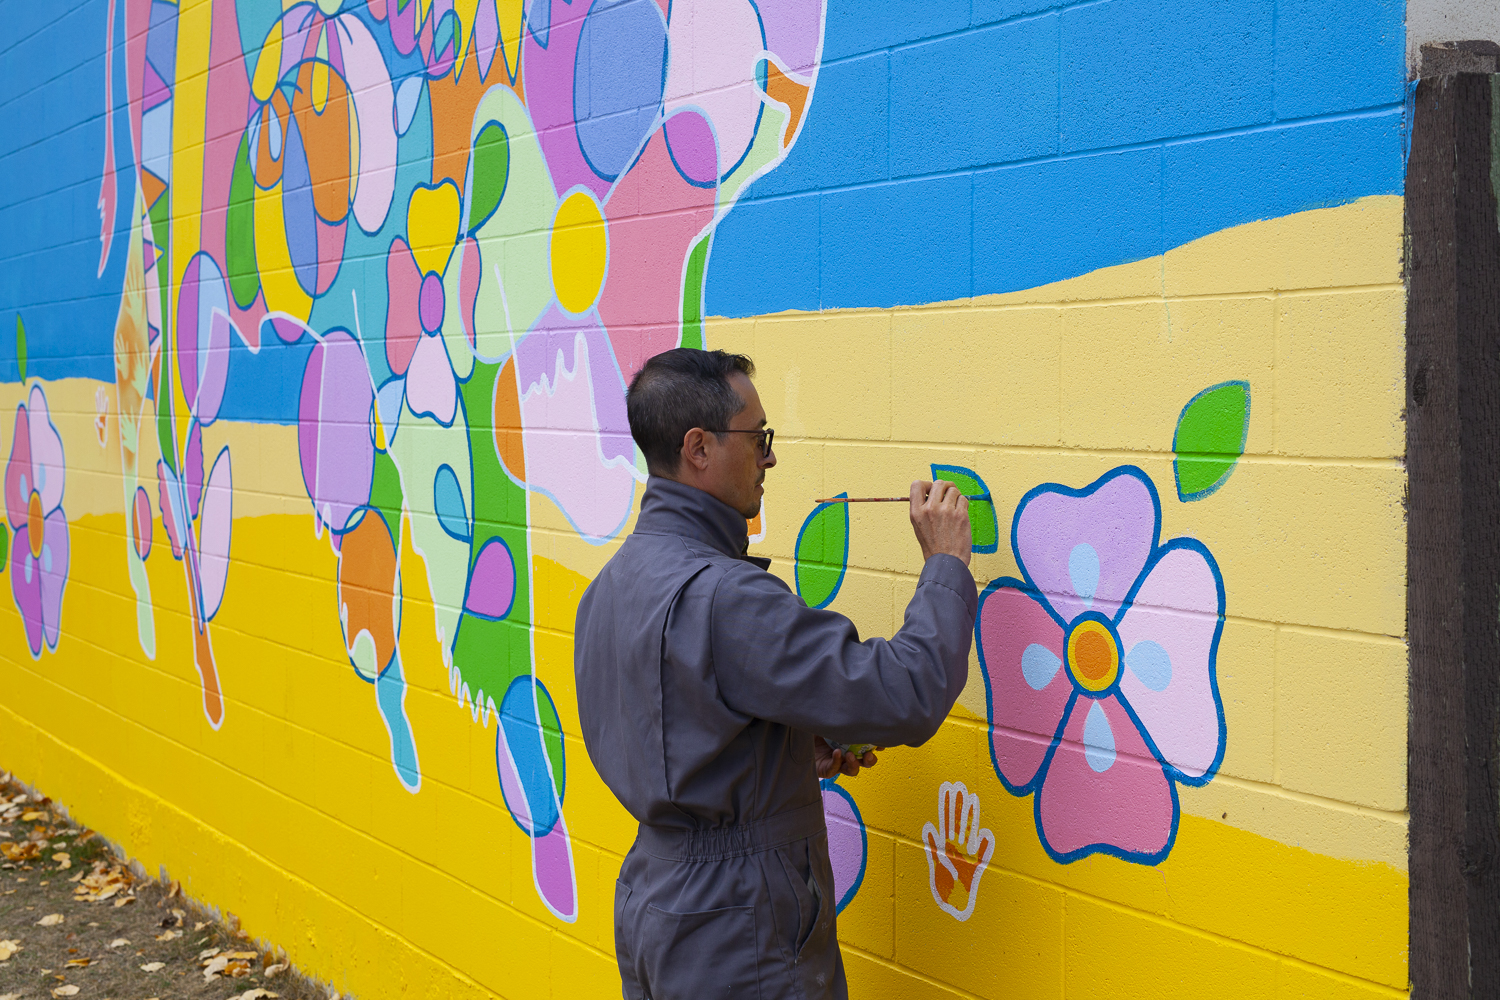 Photo of Bruno Canadien painting a leaf detail on his mural “Source of Life”. The mural features geometric shapes and motifs that form a buffalo - there are colours of pink, green, yellow, and purple on a blue & yellow background.